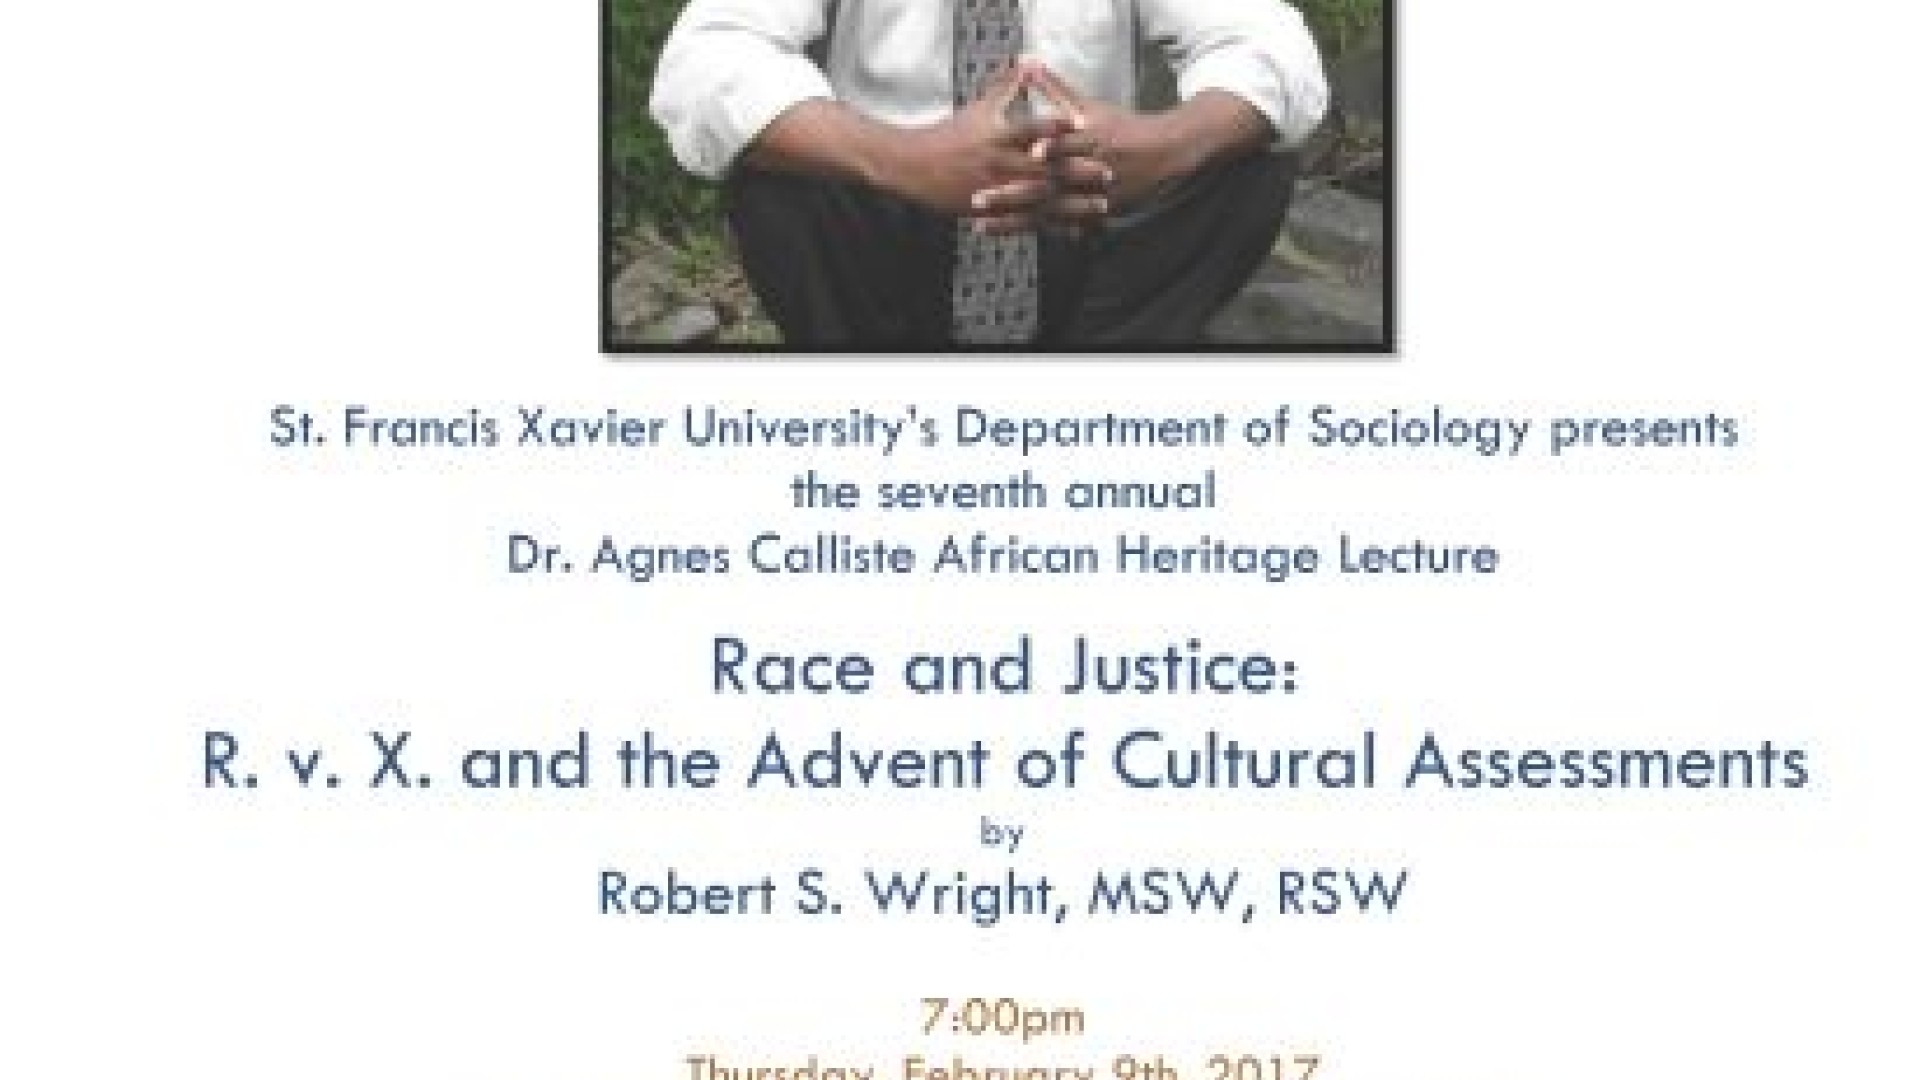 Poster: Race and Justice: R. v. X. and the Advent of Cultural Assessments featuring Robert S. Wright, MSW, RSW